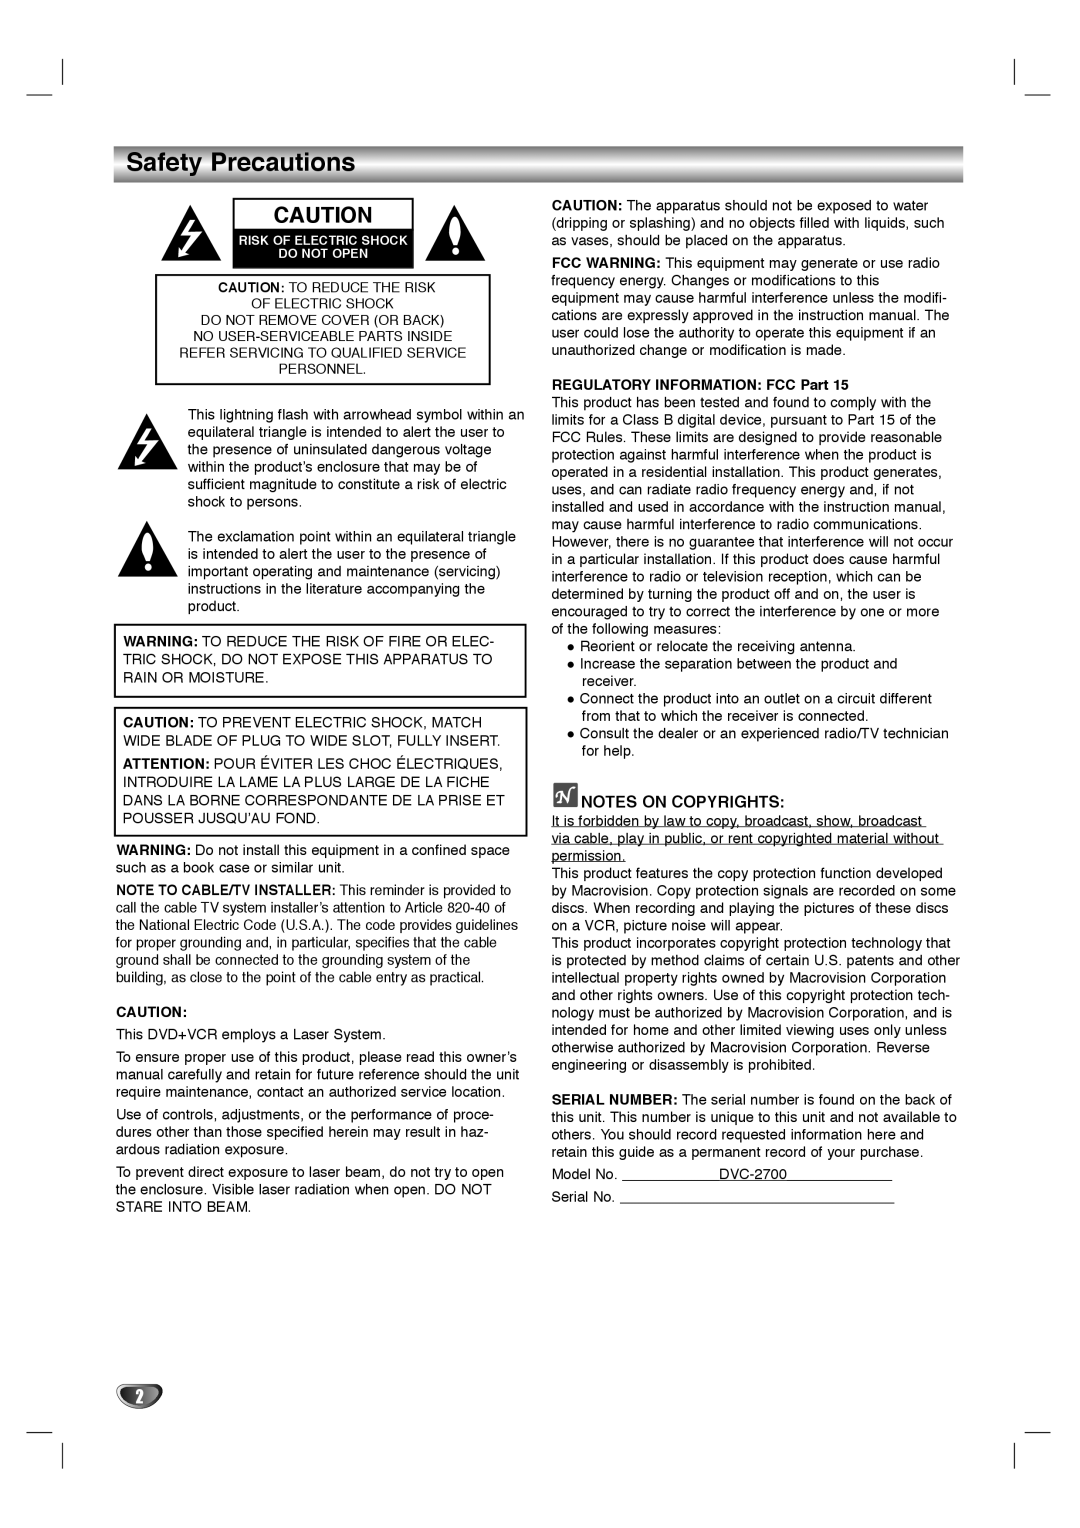 Sanyo SCP-2700 instruction manual Safety Precautions, Notes On Copyrights, REGULATORY INFORMATION FCC Part 